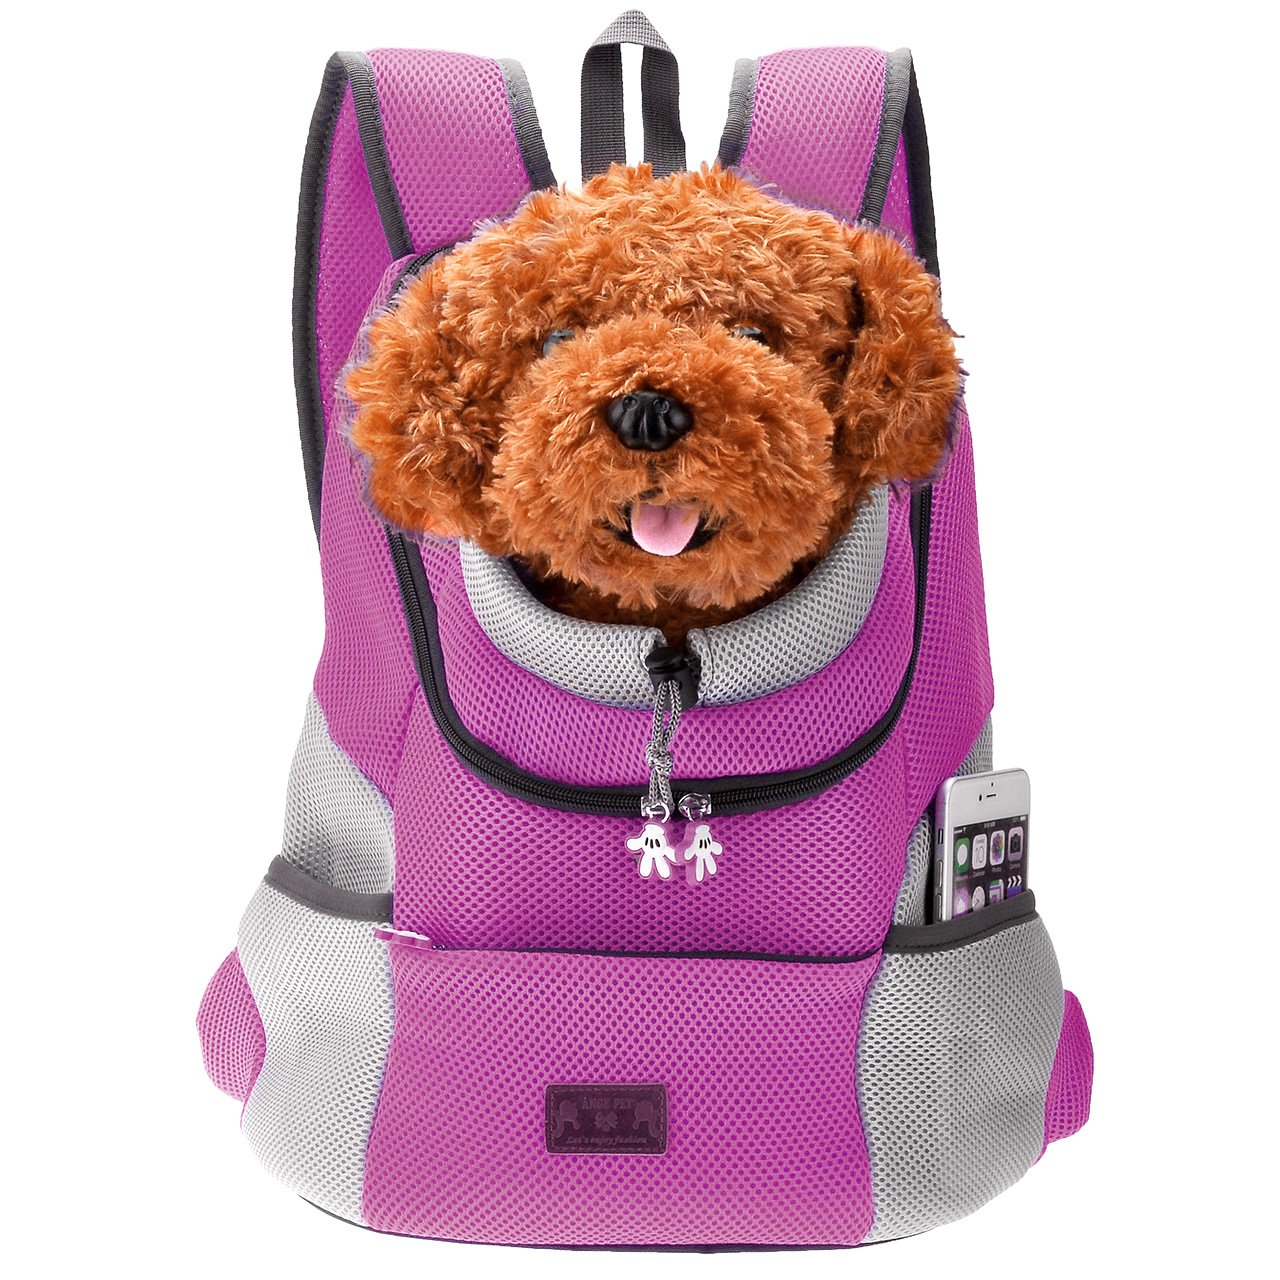 Mogoko Comfortable Dog Cat Carrier Backpack, Puppy Pet Front Pack with Breathable Head Out Design and Padded Shoulder for Hiking Outdoor Travel